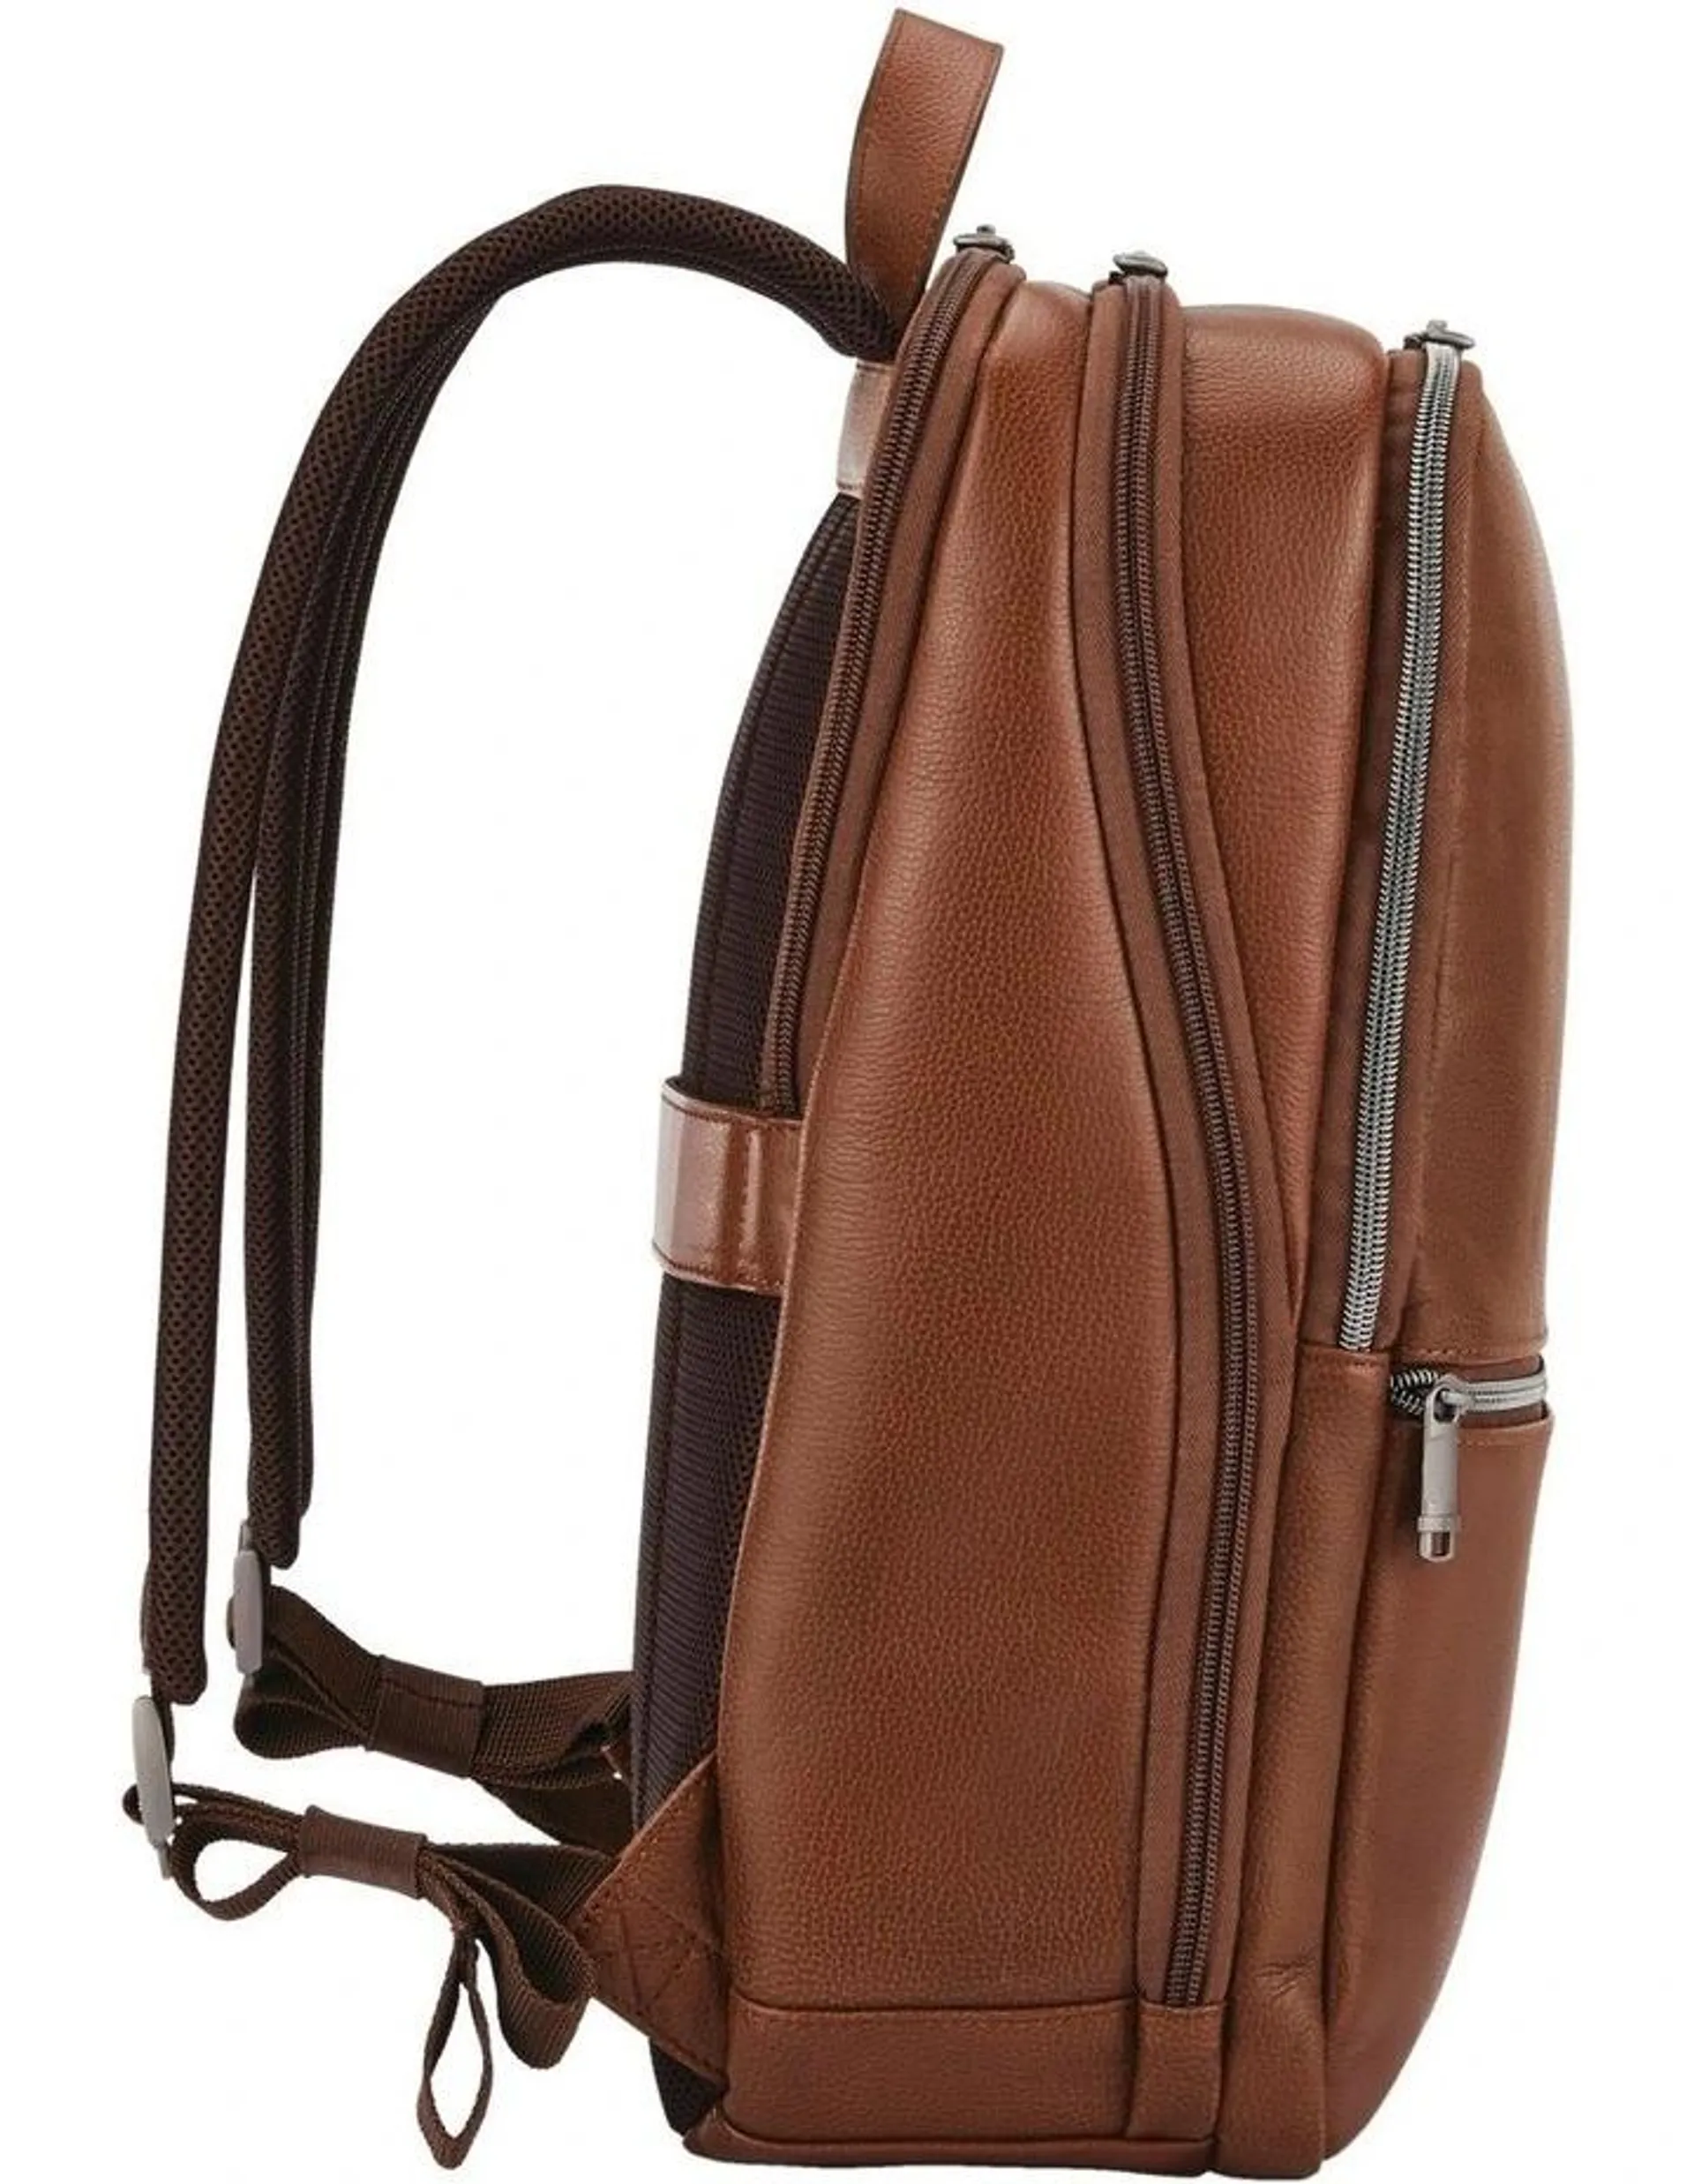 Classic Leather Slim Backpack in Cognac Brown